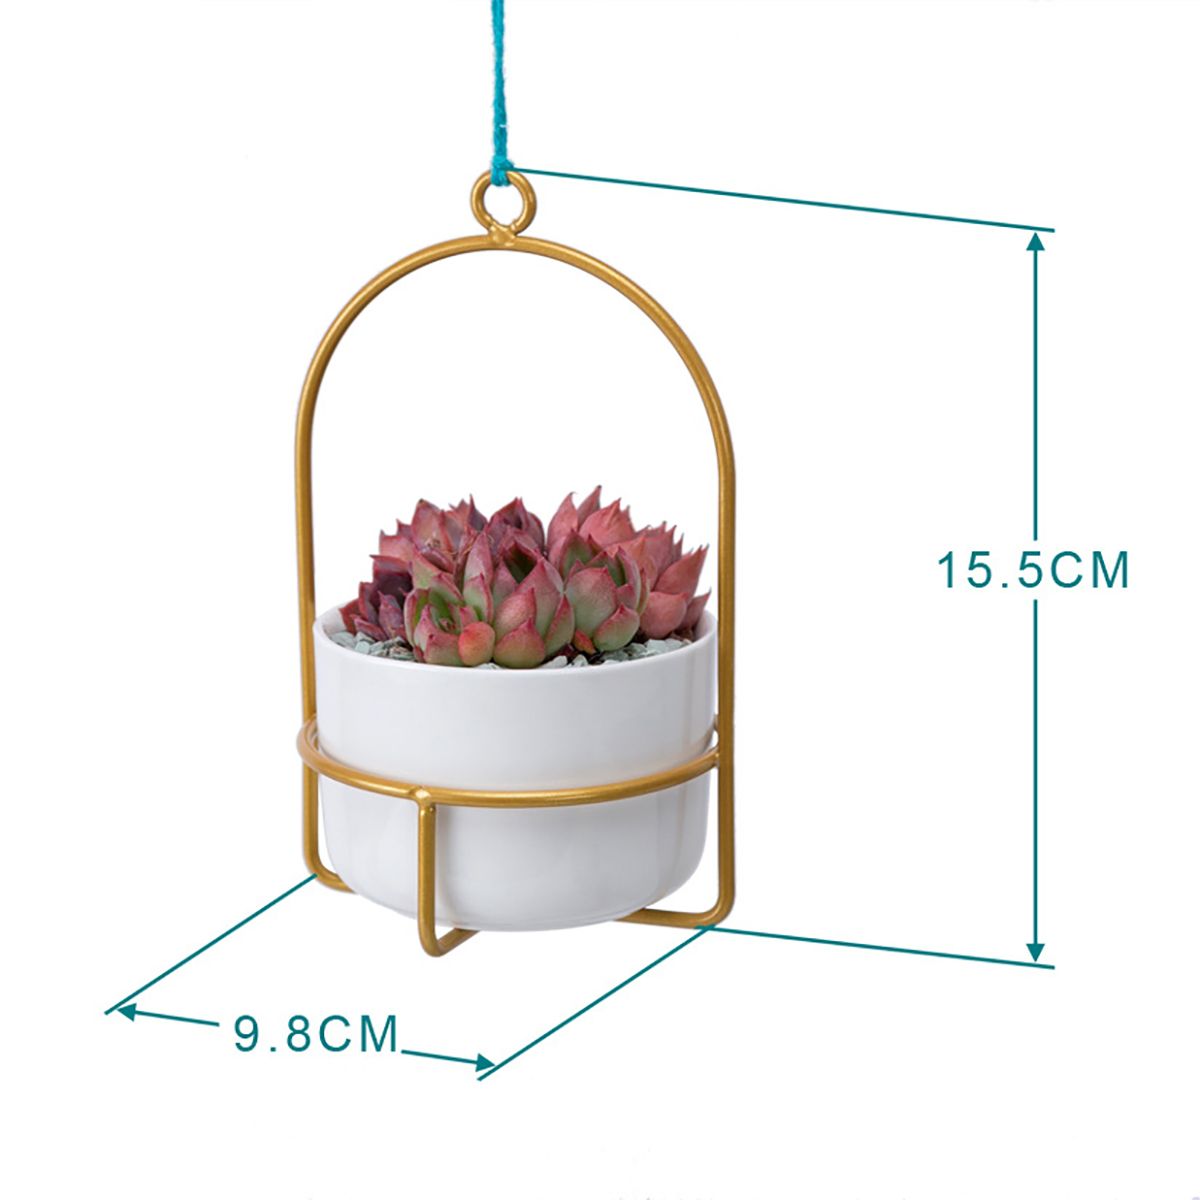 Creative-Simple-Dome-Hanging-Basin-Ceramic-Wrought-Iron-Flower-Stand-Flower-Pot-1733354